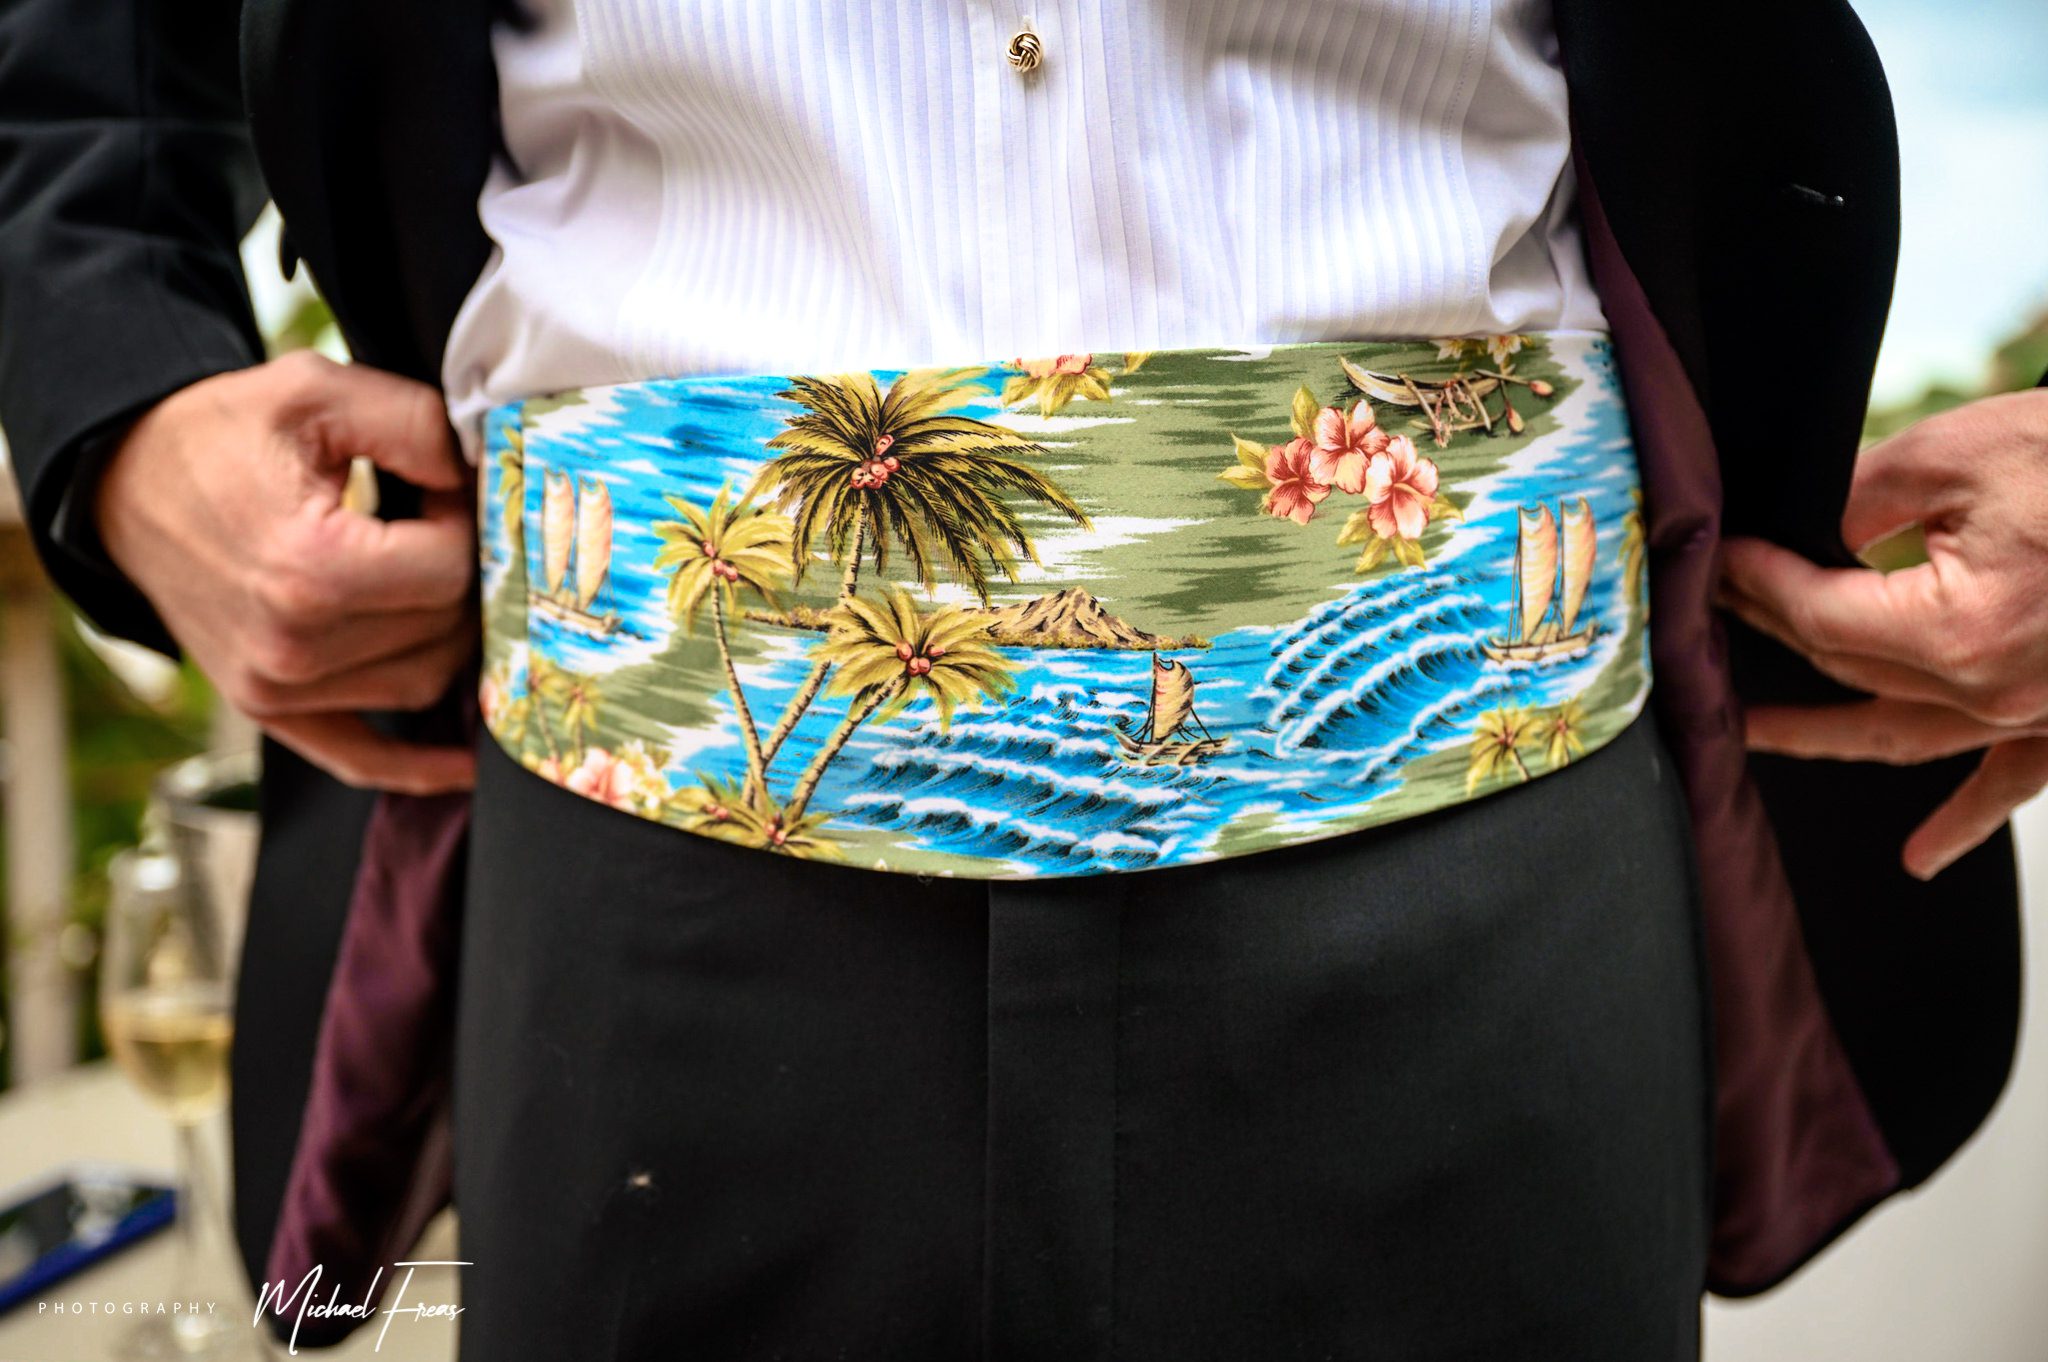 A man in a tuxedo is wearing a belt with a Florida Keys theme.